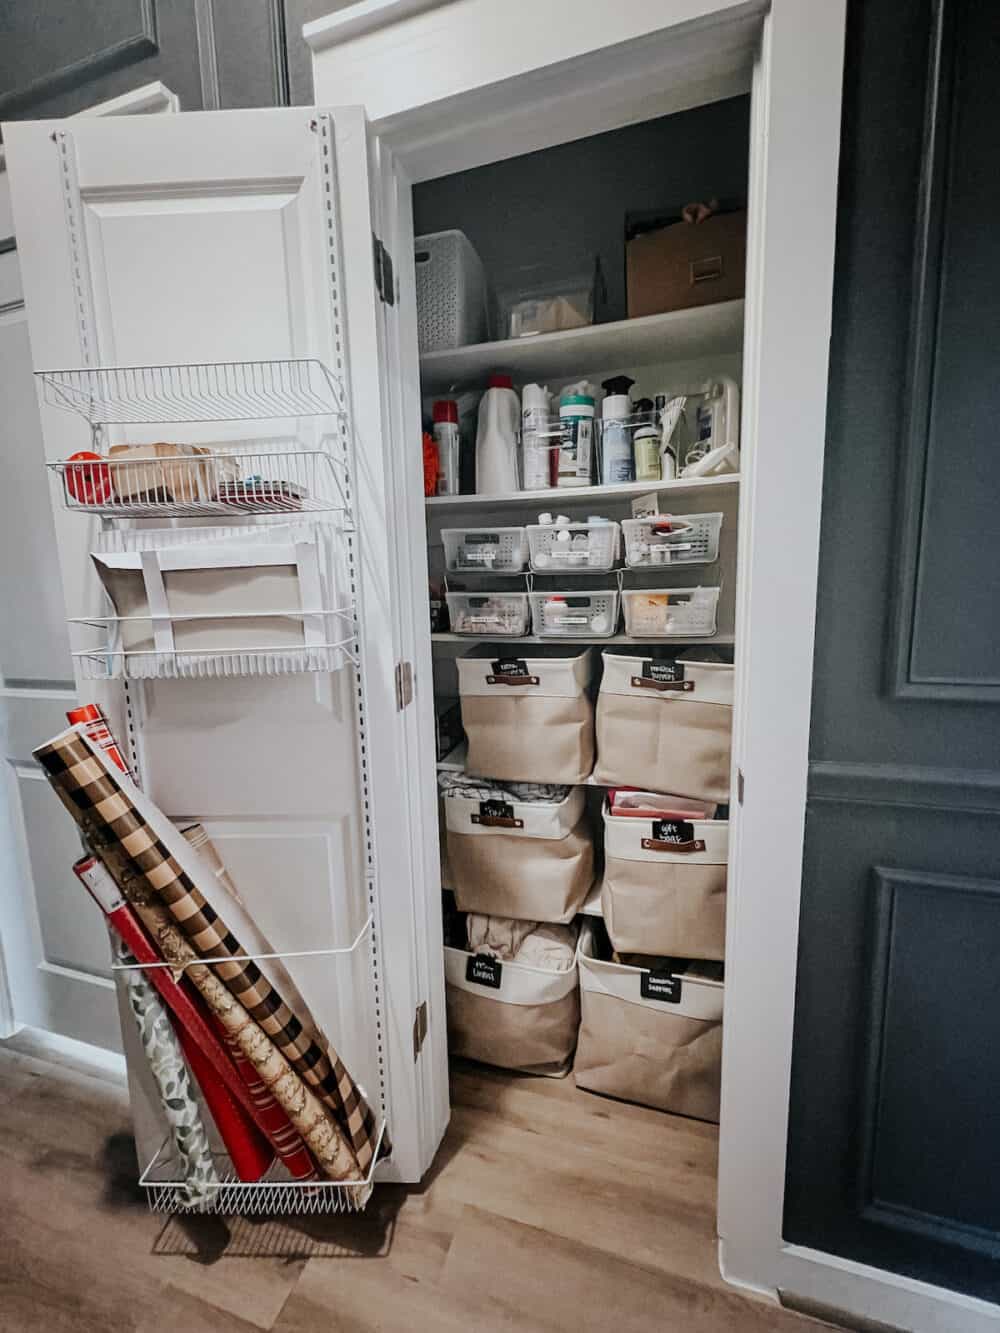 A linen closet organized with large baskets